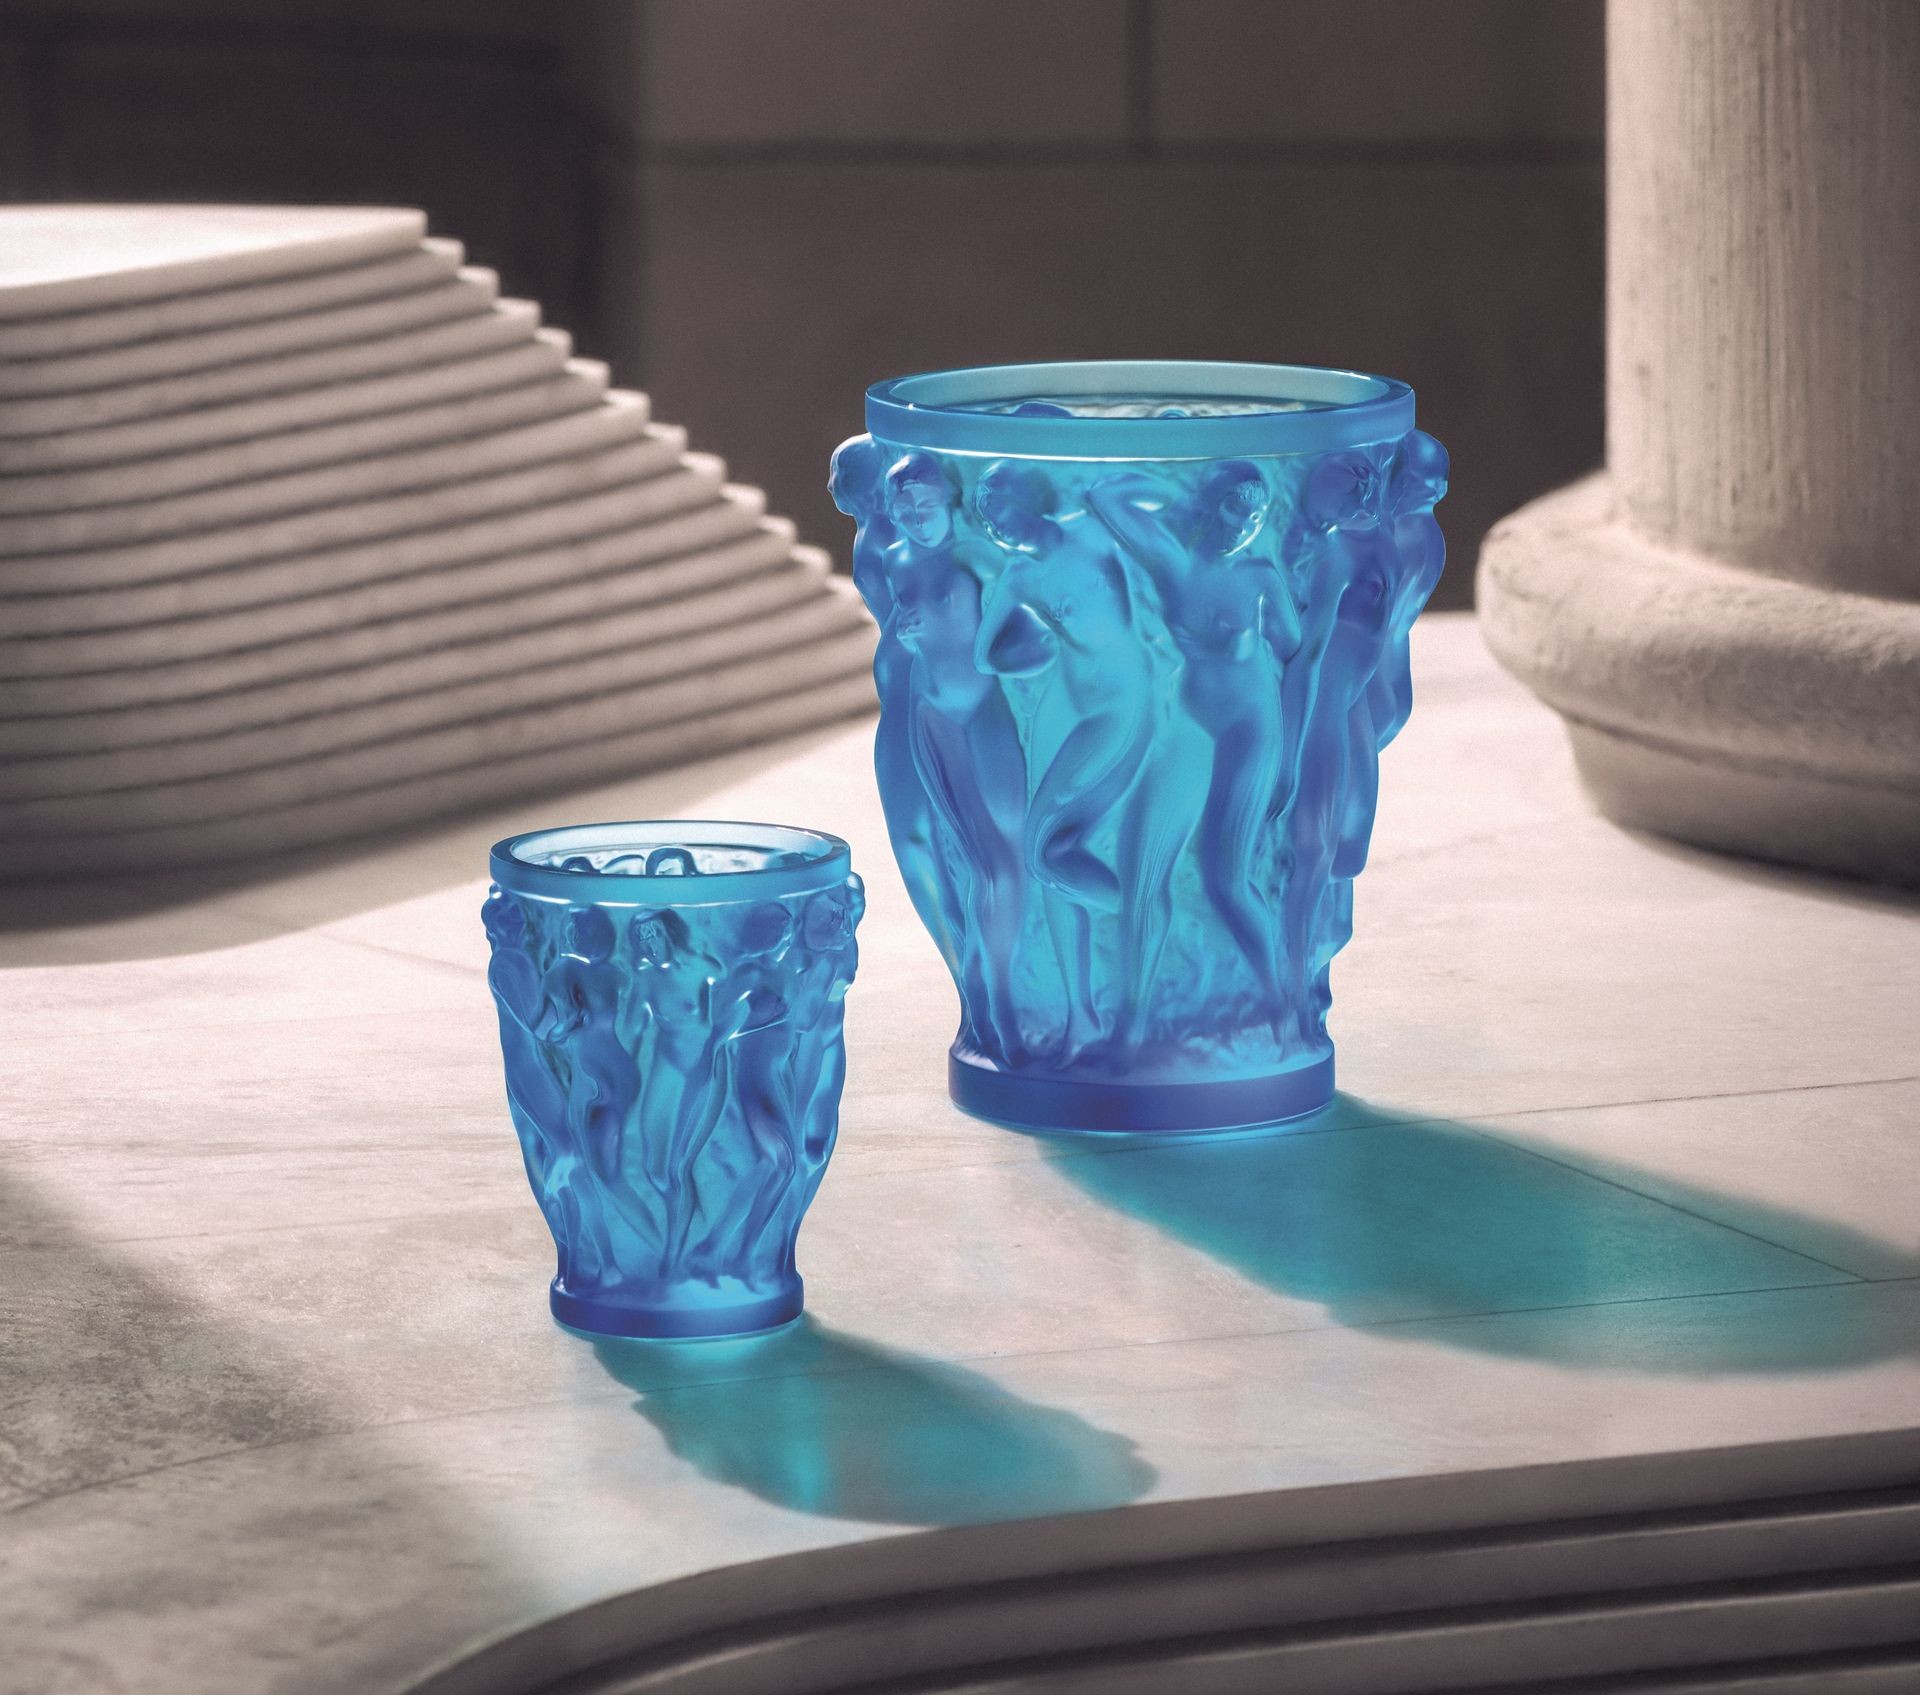 Lalique decorative objects